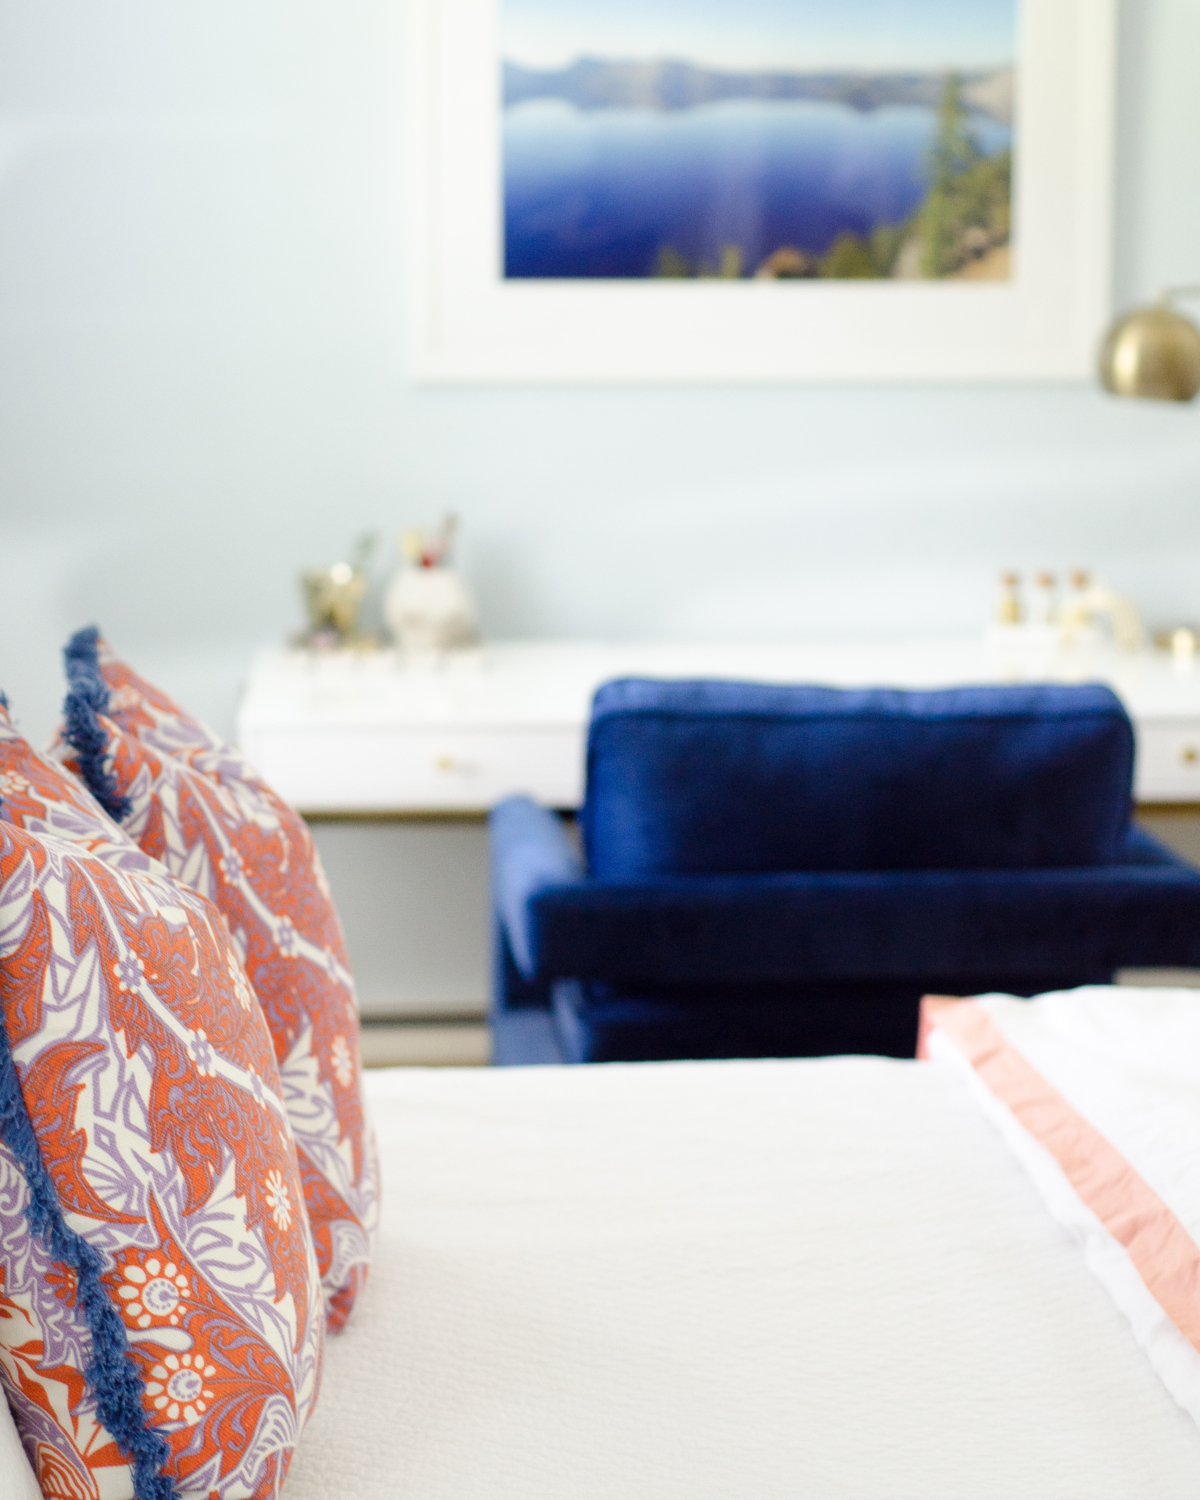 A bright, happy blue and white bedroom with pops of coral and woven basket wall art